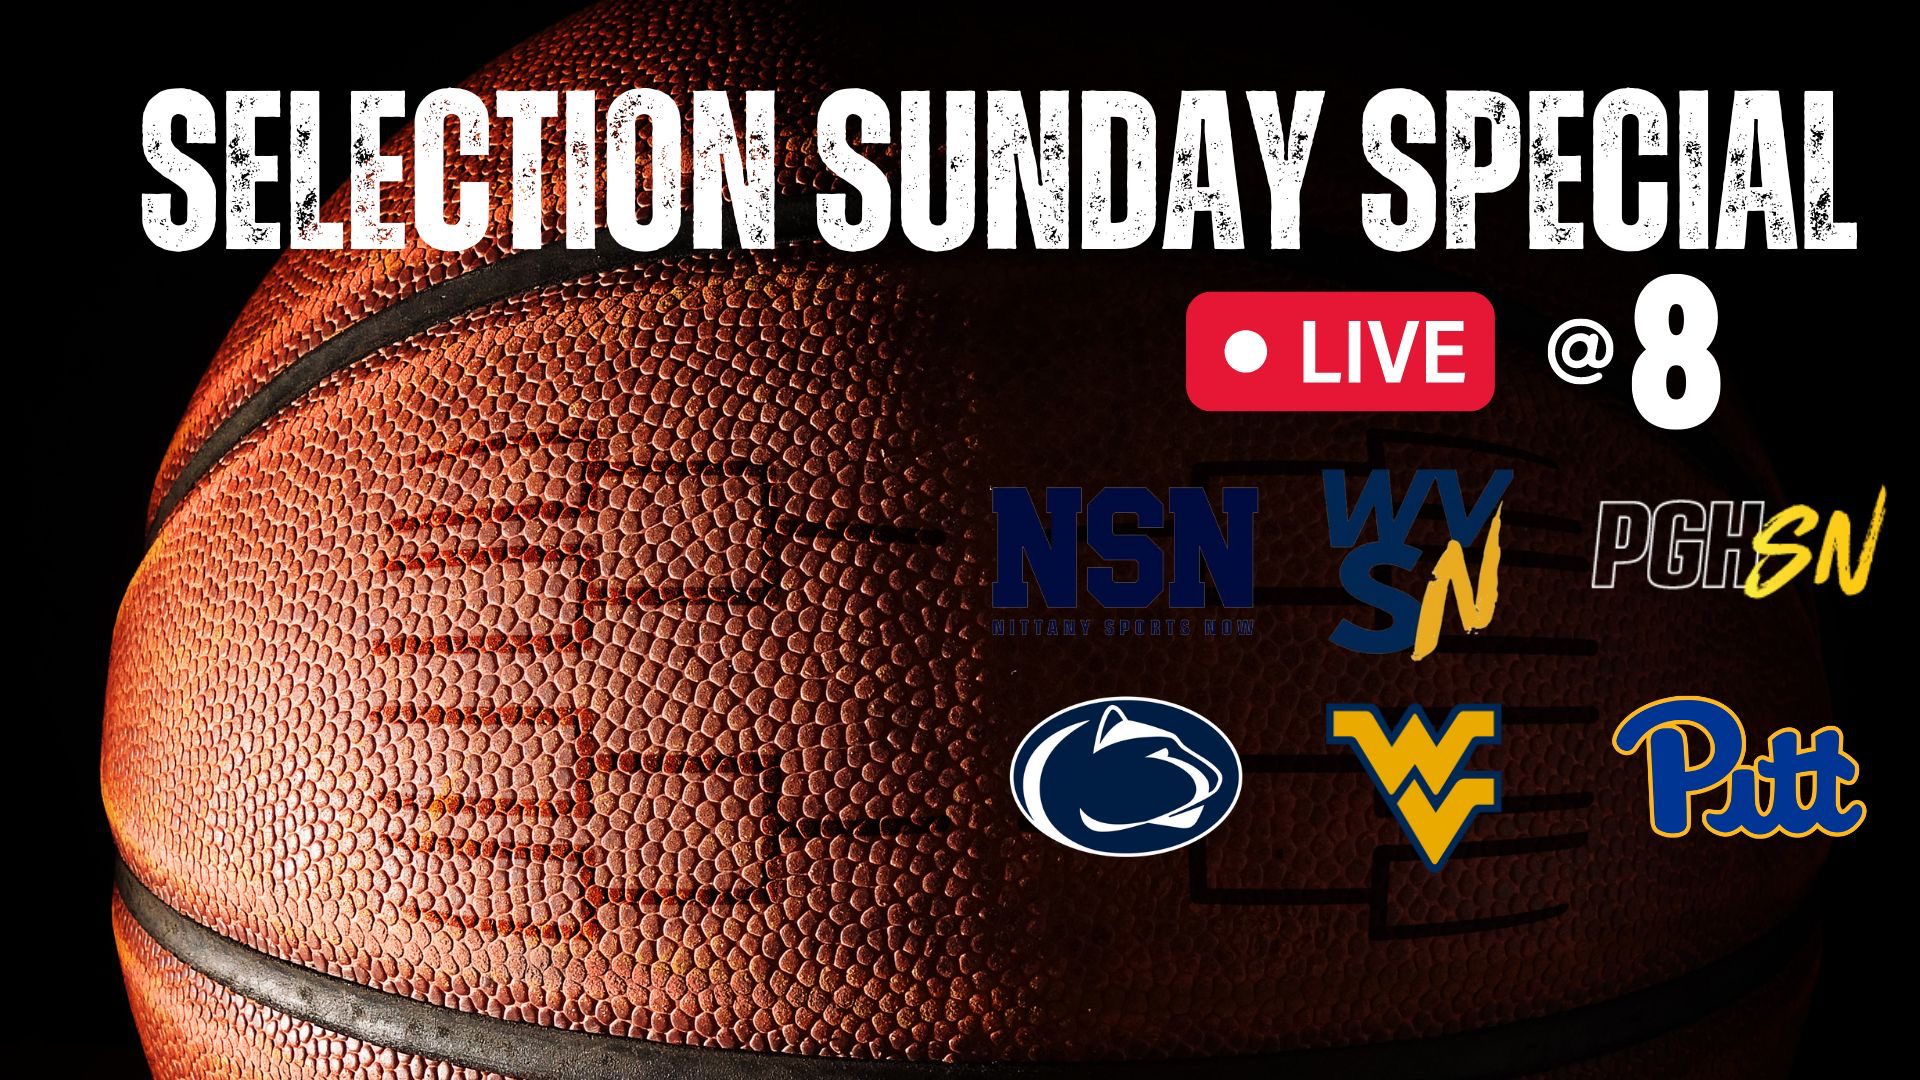 Sports Now Network to Offer Live Reaction Show on Selection Sunday